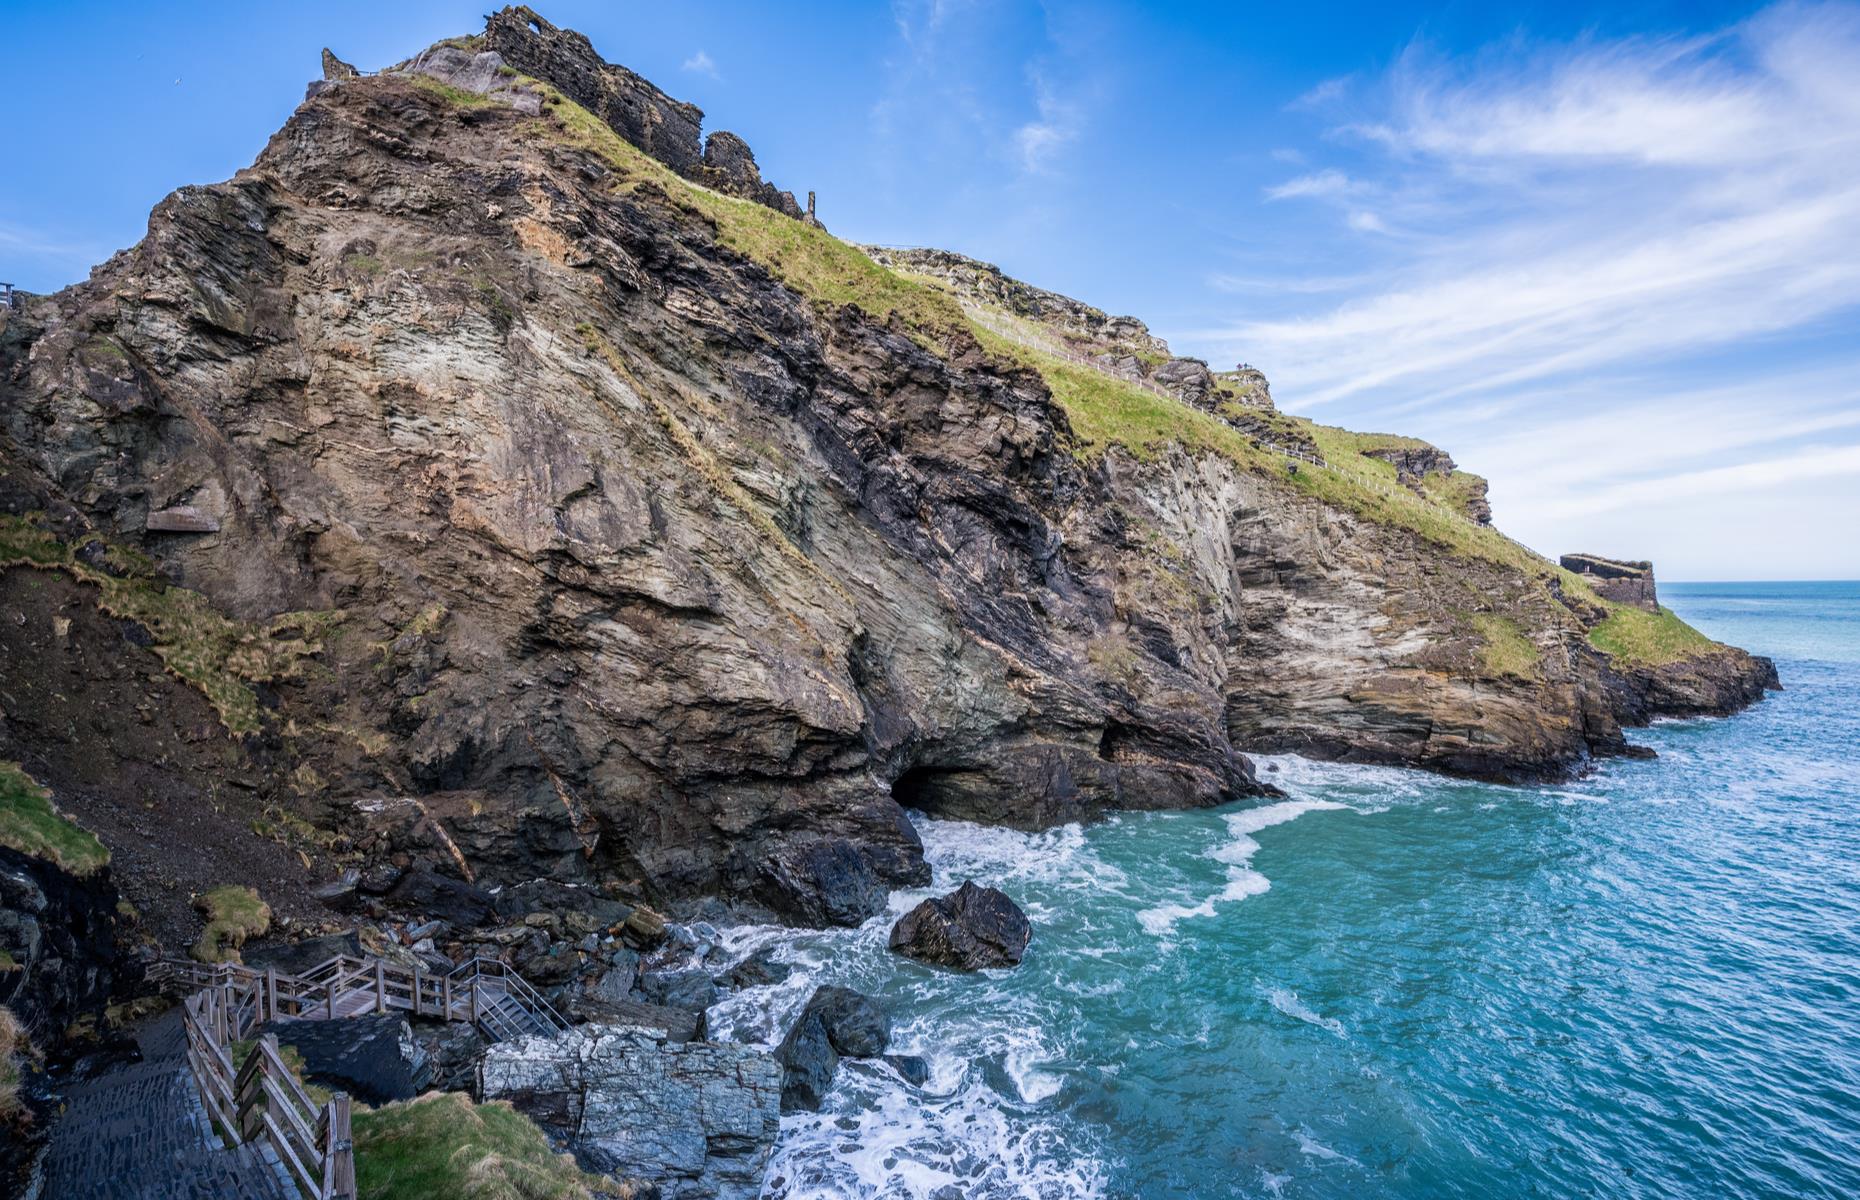 <p>The existence of the so-called “once and future king” is questionable, but the legend has captured imaginations since the Middle Ages. Tintagel’s association with Arthurian legends is thought to have inspired Richard, Earl of Cornwall to build a castle here in 1230. A rocky inlet below the castle, meanwhile, has been known as Merlin’s Cave since Victorian poet Alfred Tennyson's retelling of the legend, in which Merlin used a passageway below the castle to carry away the infant Arthur.</p>